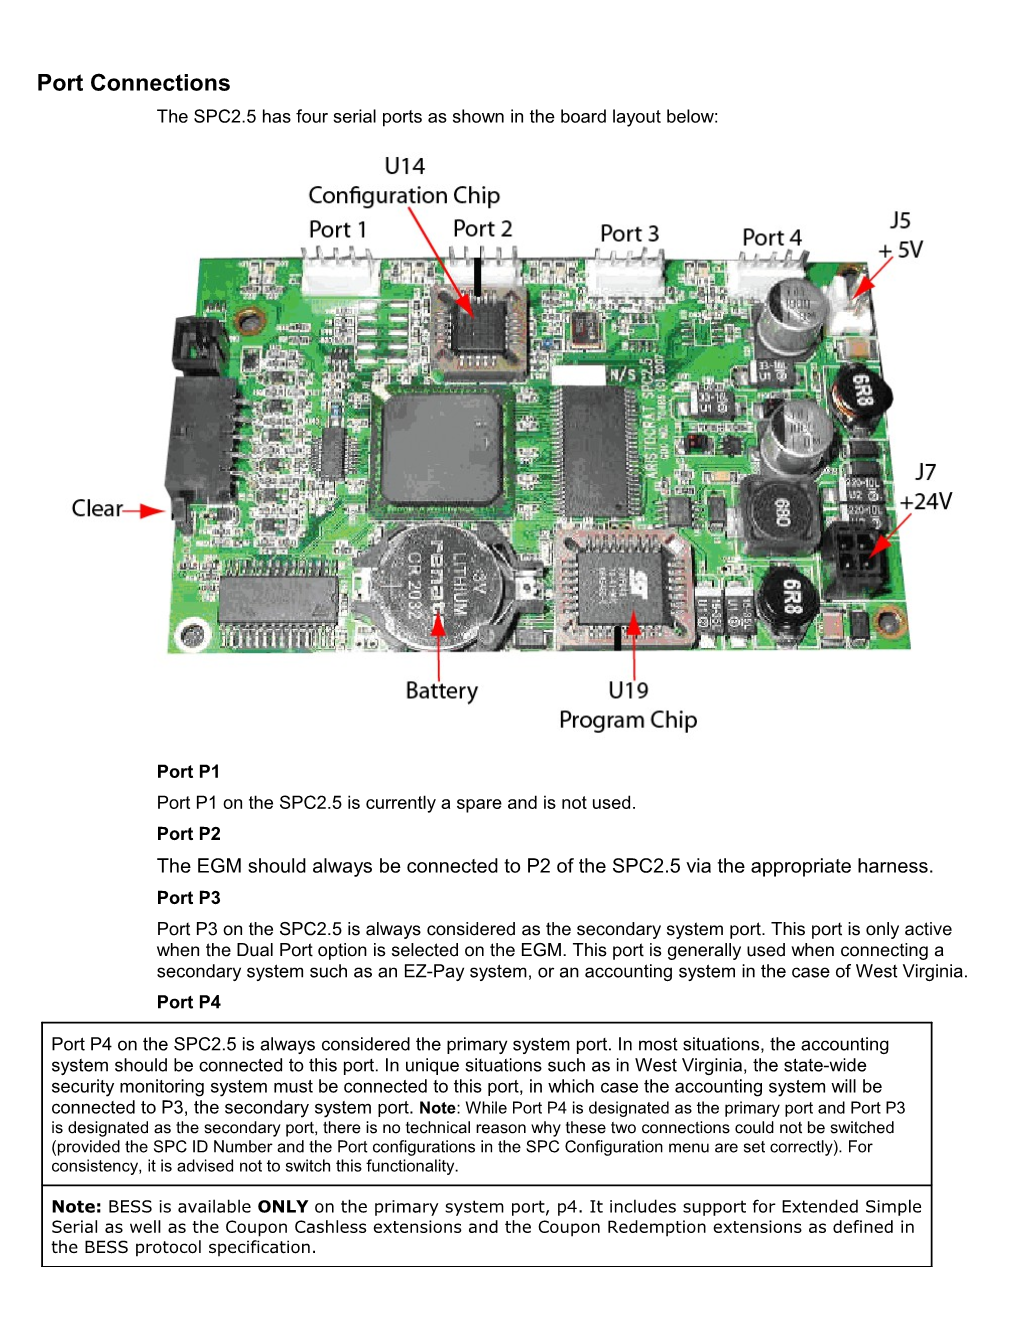 The SPC2.5 Has Four Serial Ports As Shown in the Board Layout Below